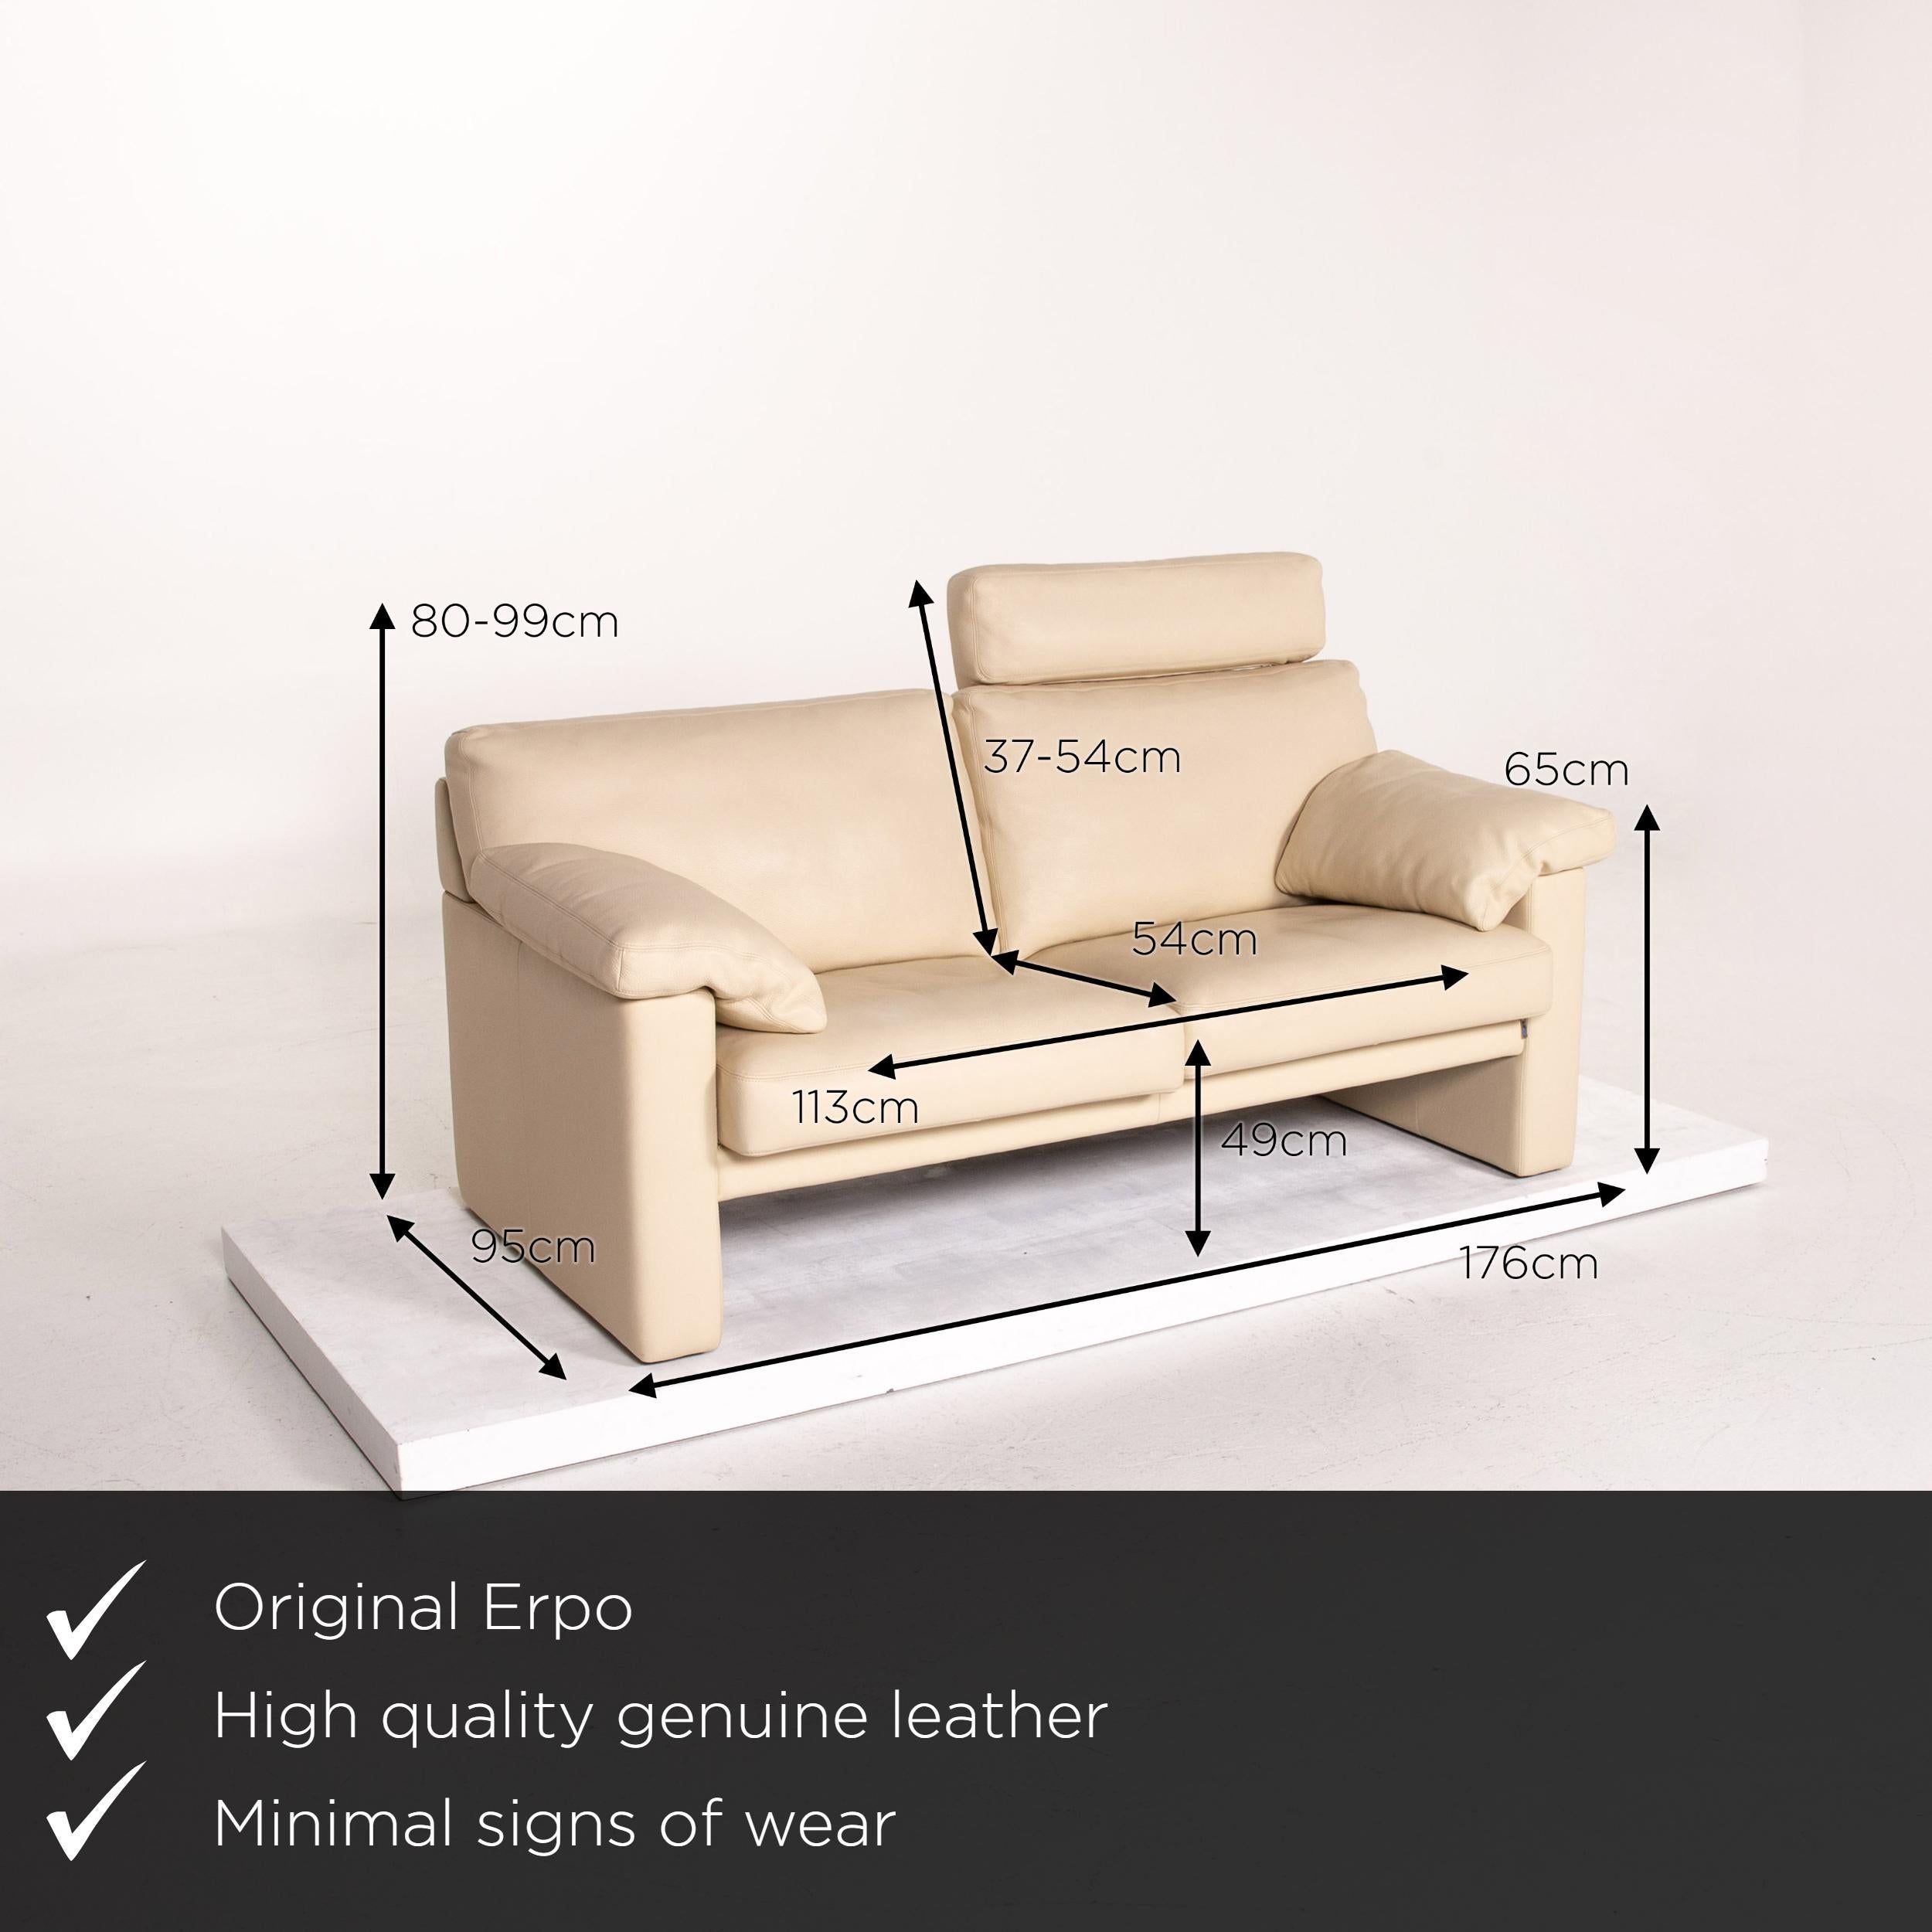 We present to you an Erpo leather sofa cream two-seat function couch.

 

 Product measurements in centimeters:
 

Depth 95
Width 176
Height 99
Seat height 49
Rest height 65
Seat depth 54
Seat width 113
Back height 37.